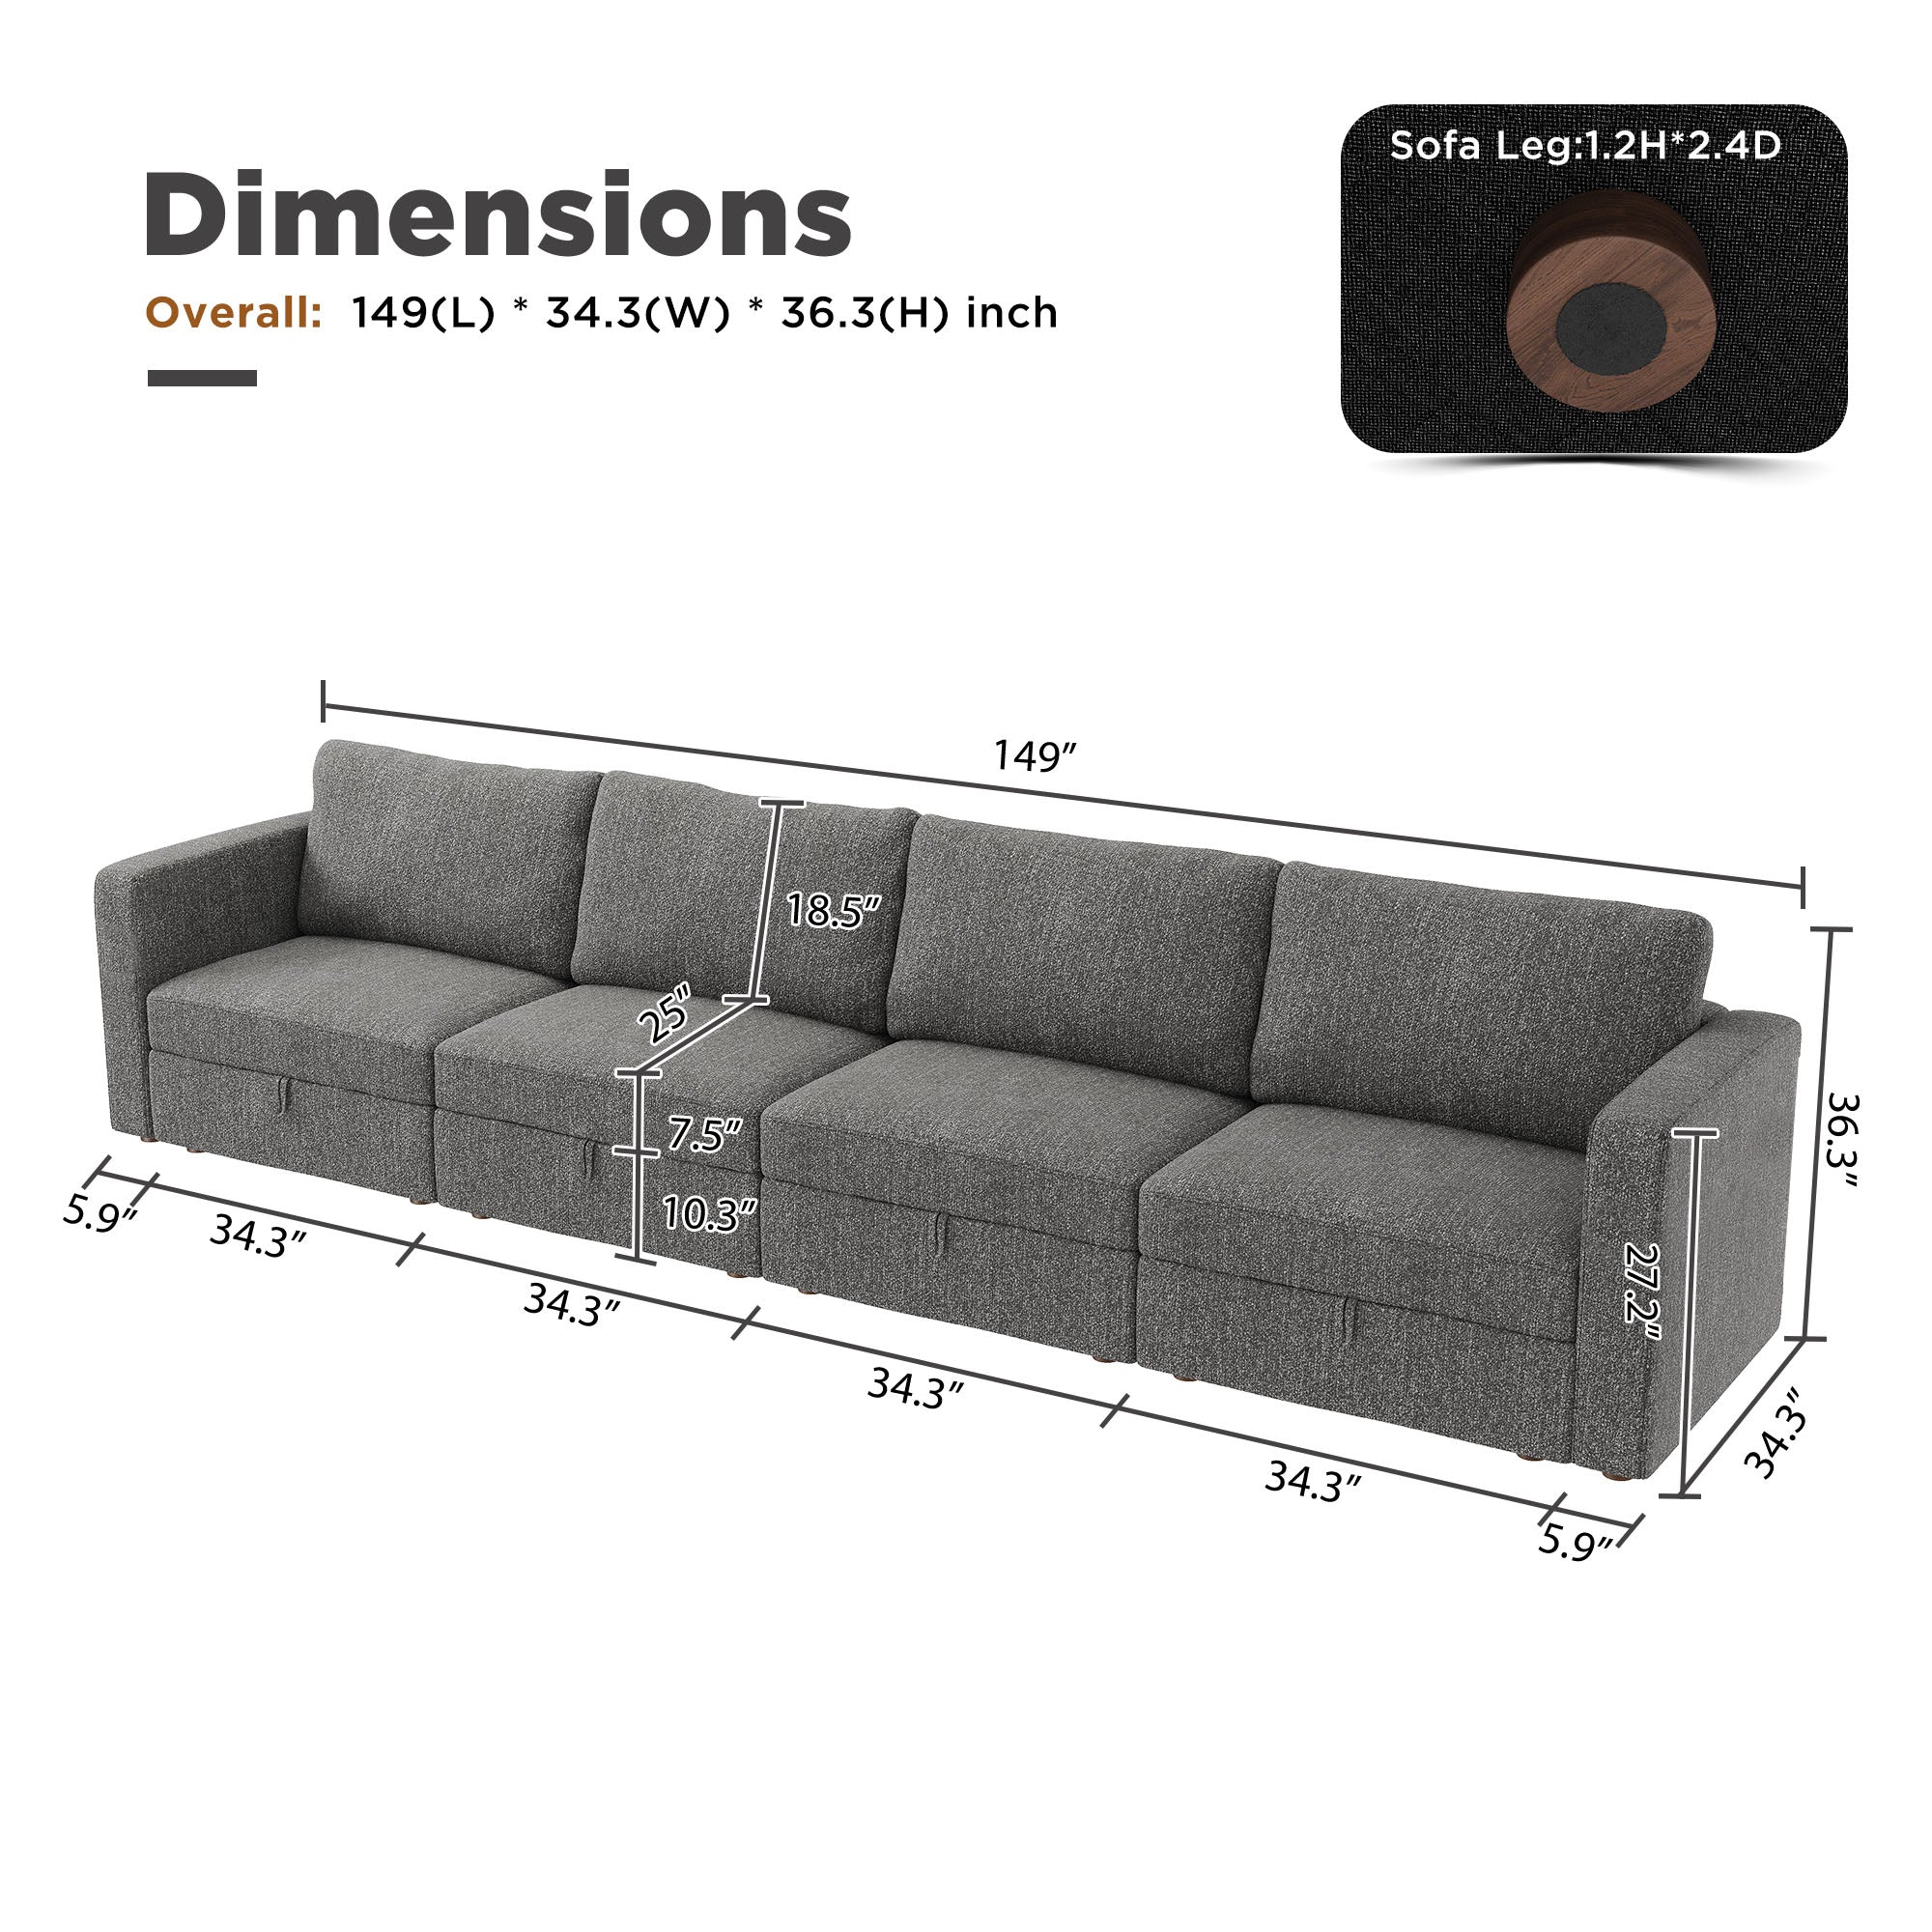 HONBAY 149" Wide Fabric 4 Seaters Modular Sectional Sofa